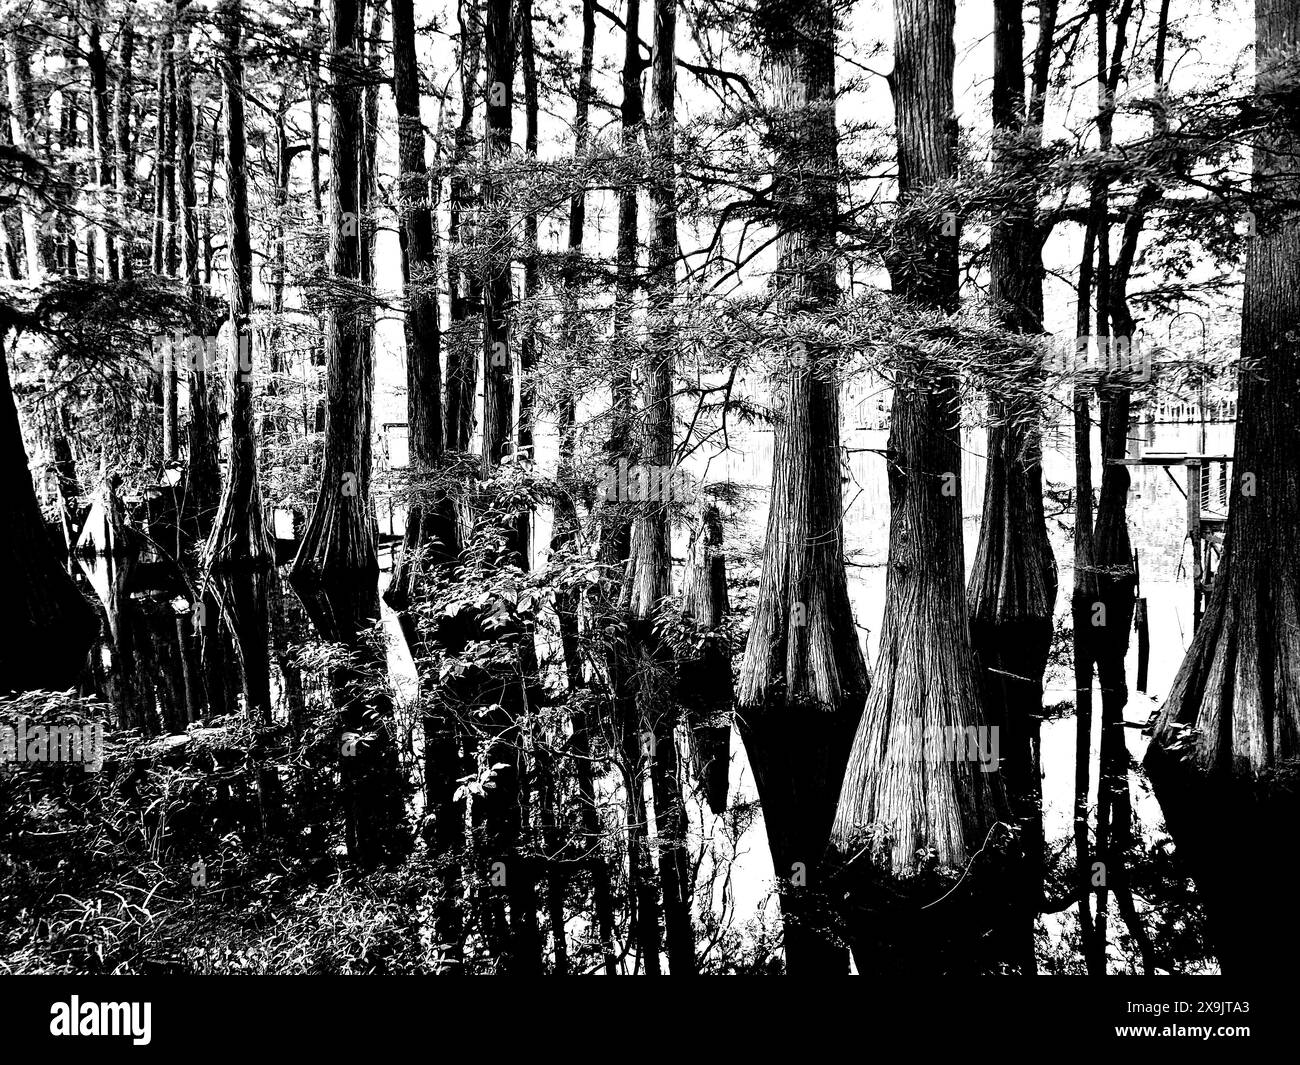 Bald cypress trees in Black and White in swamp Stock Photo